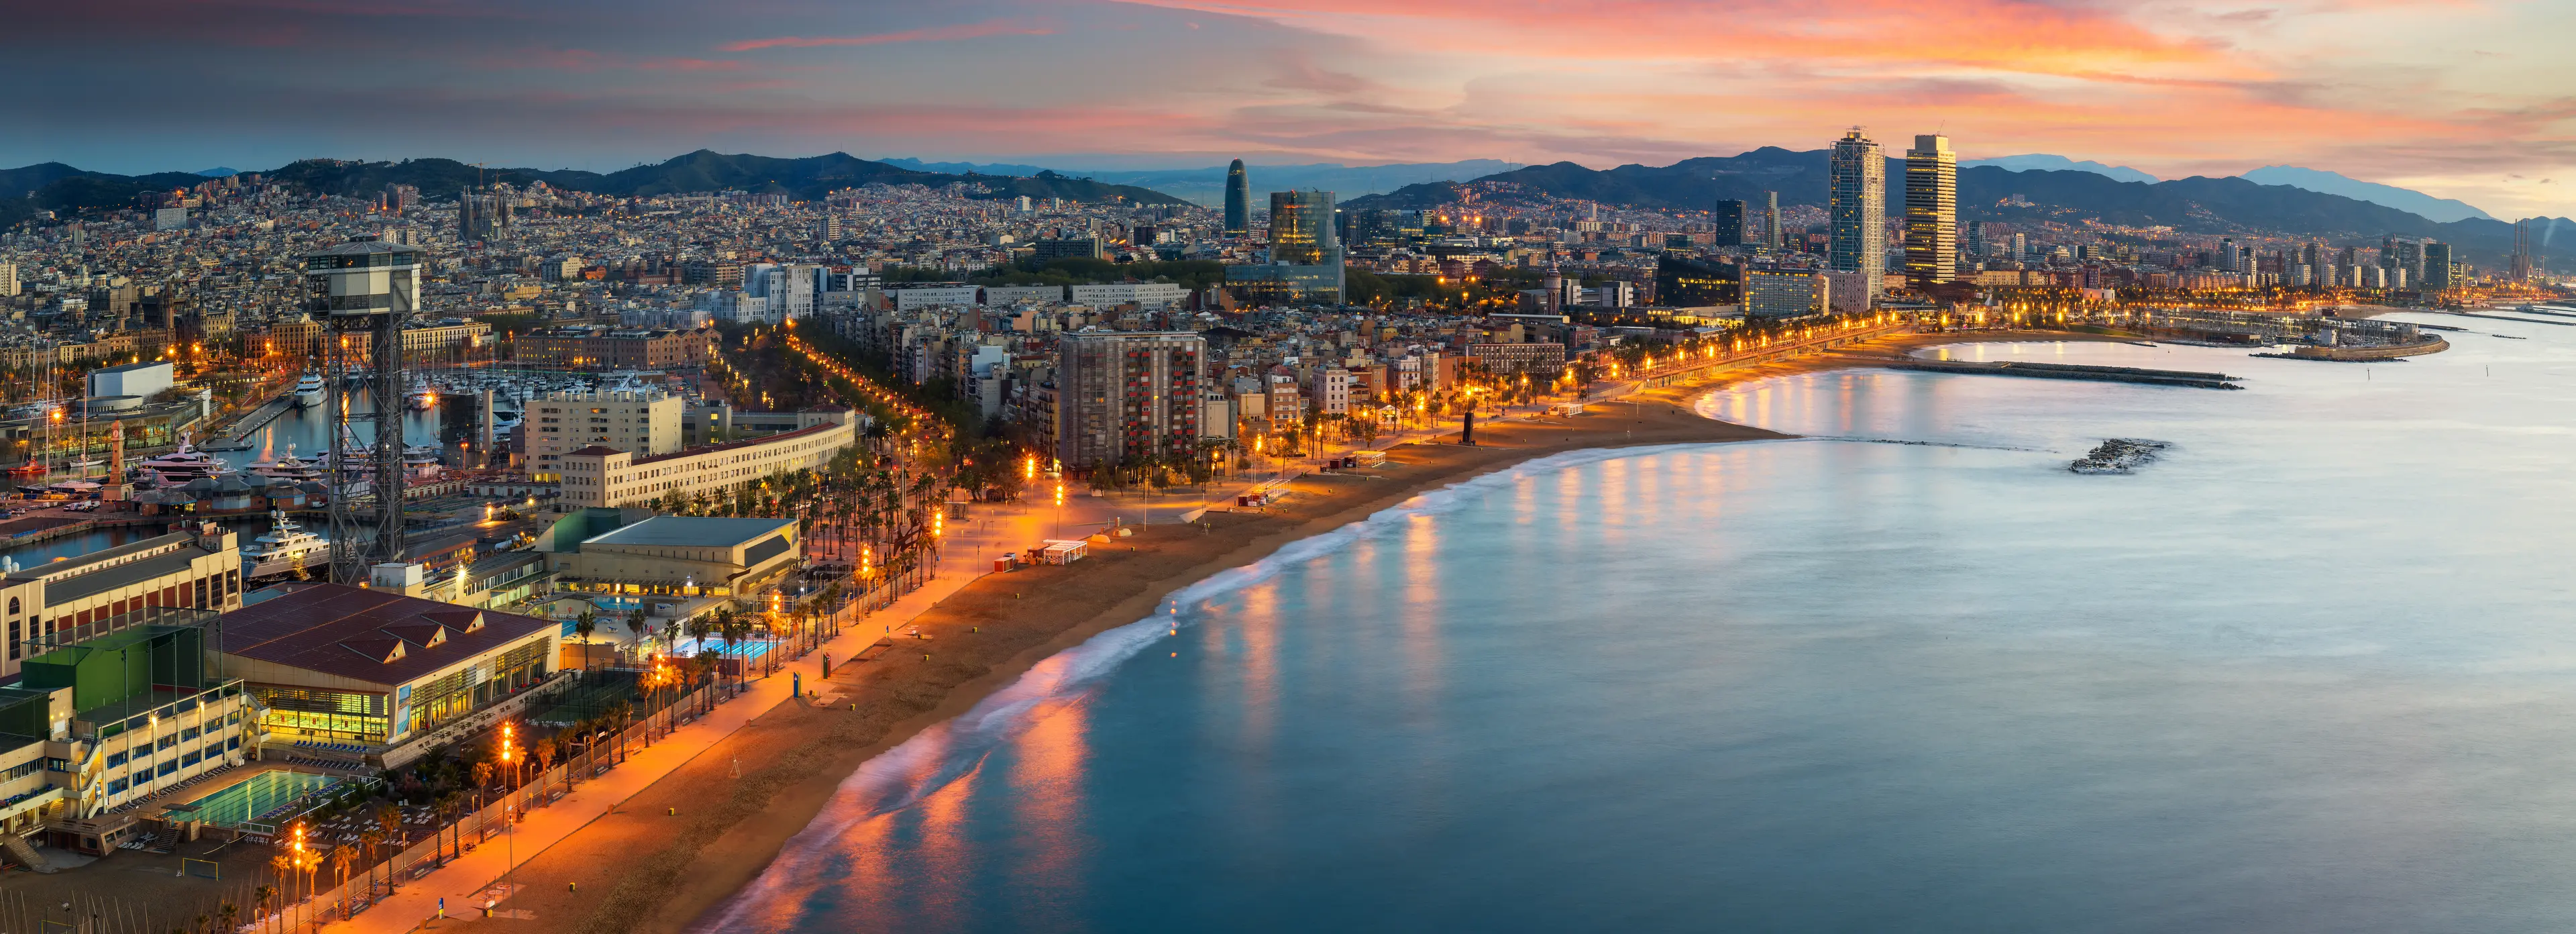 3-Day Adventure and Sightseeing in Undiscovered Barcelona